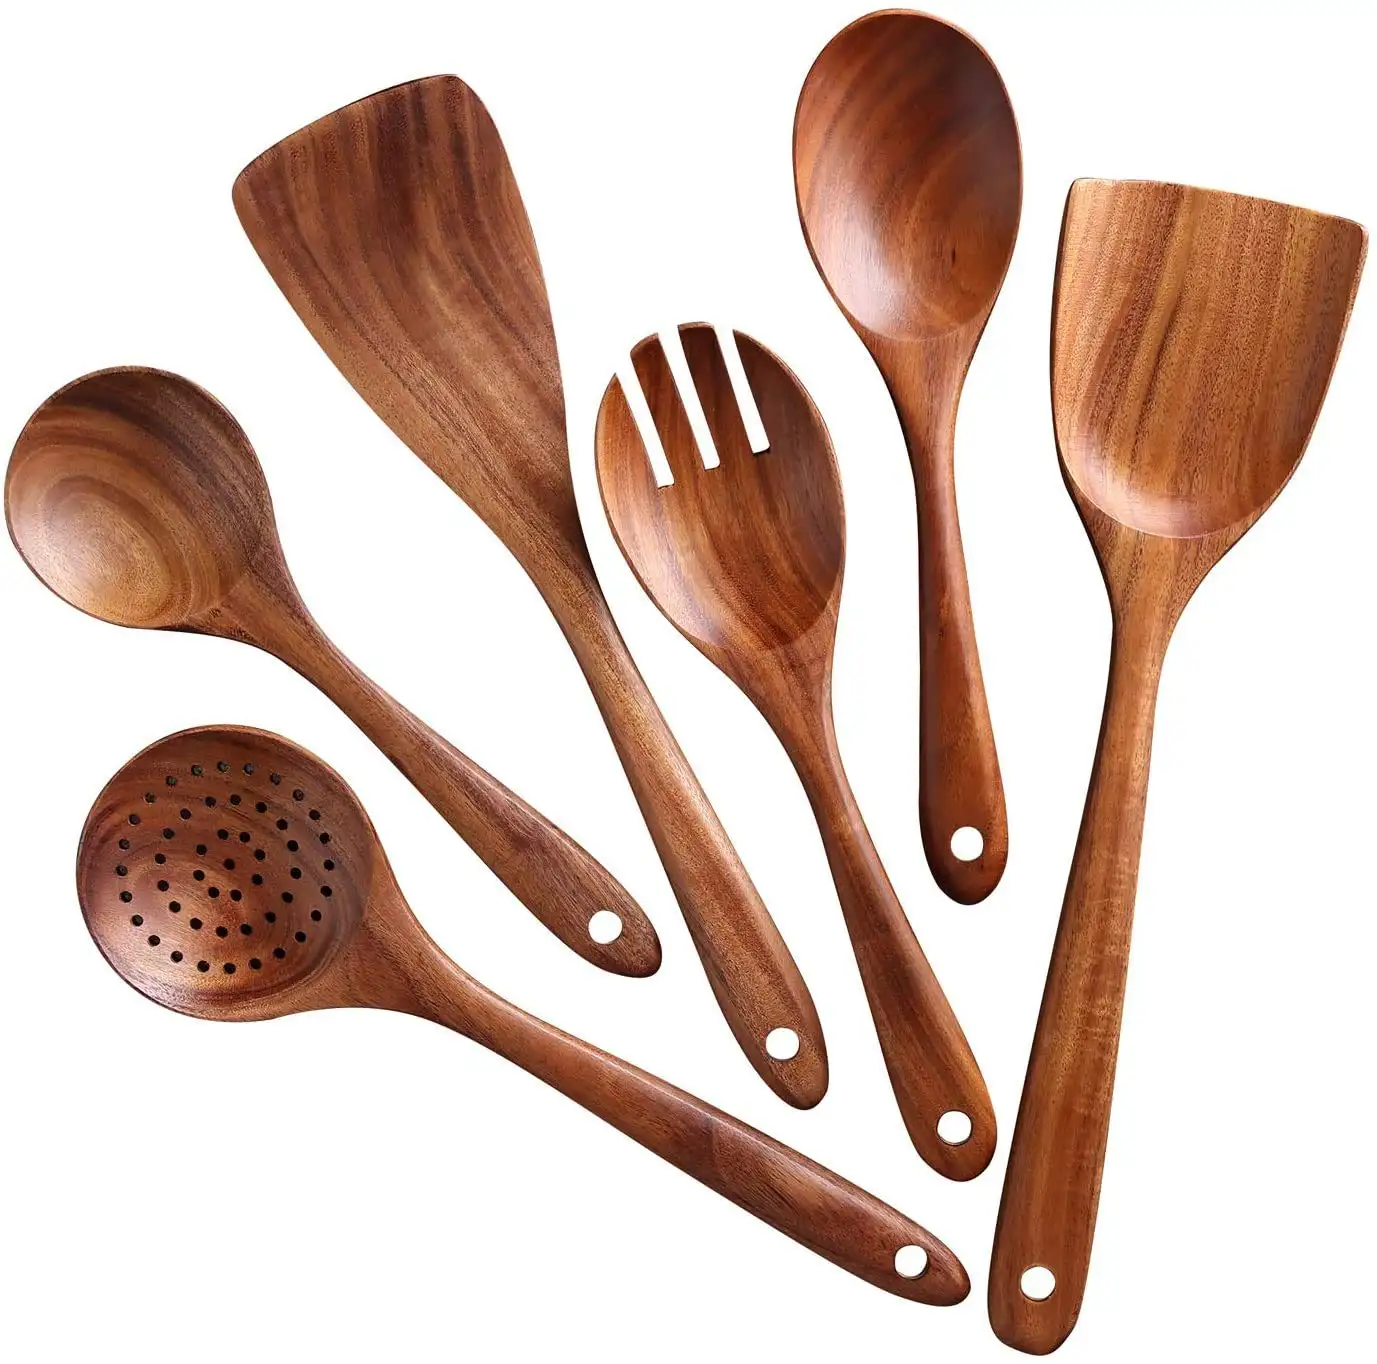 Wholesale customization cheap wooden disposable spoon fork and knife set wooden tableware packaged separately Wholesale Supplier